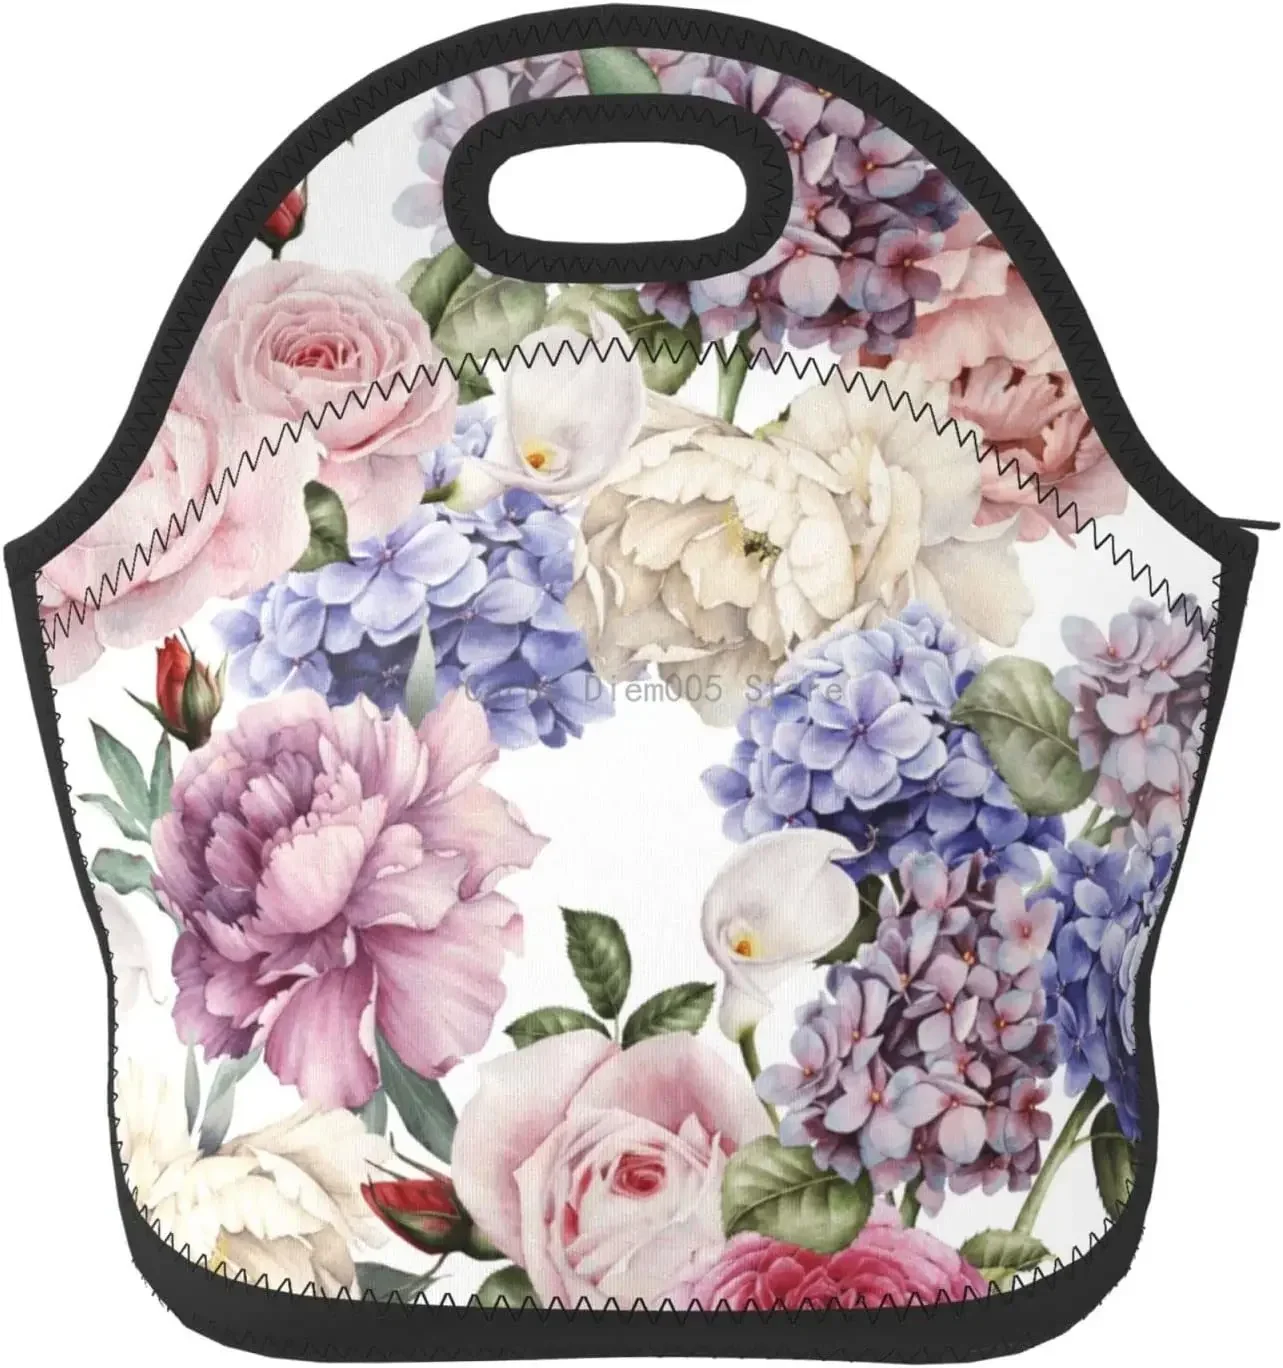 

Lunch Bags Pretty Flower Blossoms High Capacity Lunch Tote Insulated Lunchbox for Women Adults Teens Students